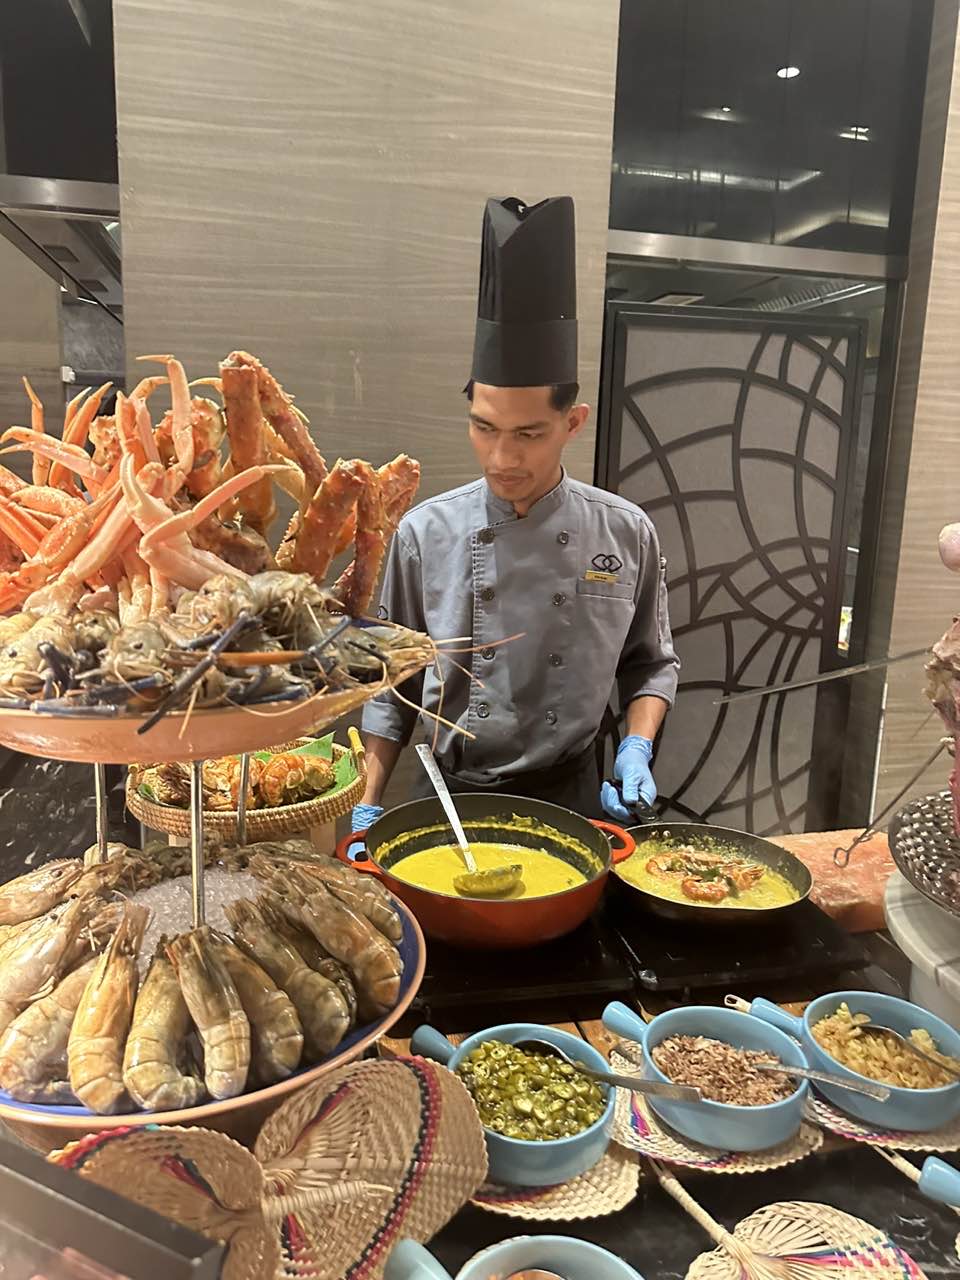 Chef cooking at a buffet setting